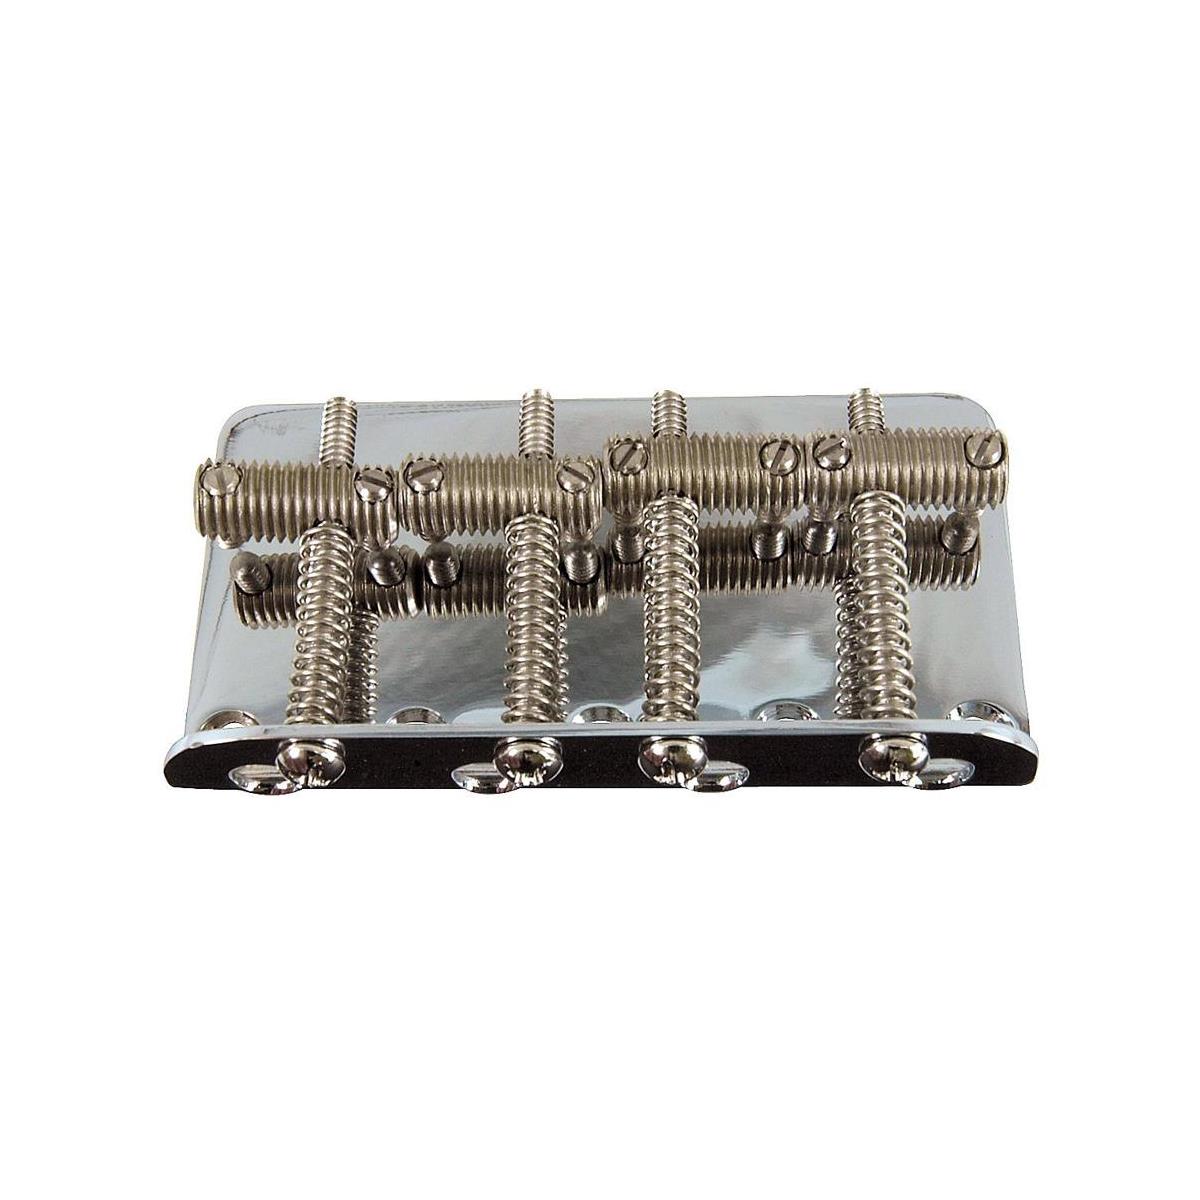 Image of Fender Bridge Assembly for American Vintage Jazz Bass and Precision Bass Guitars